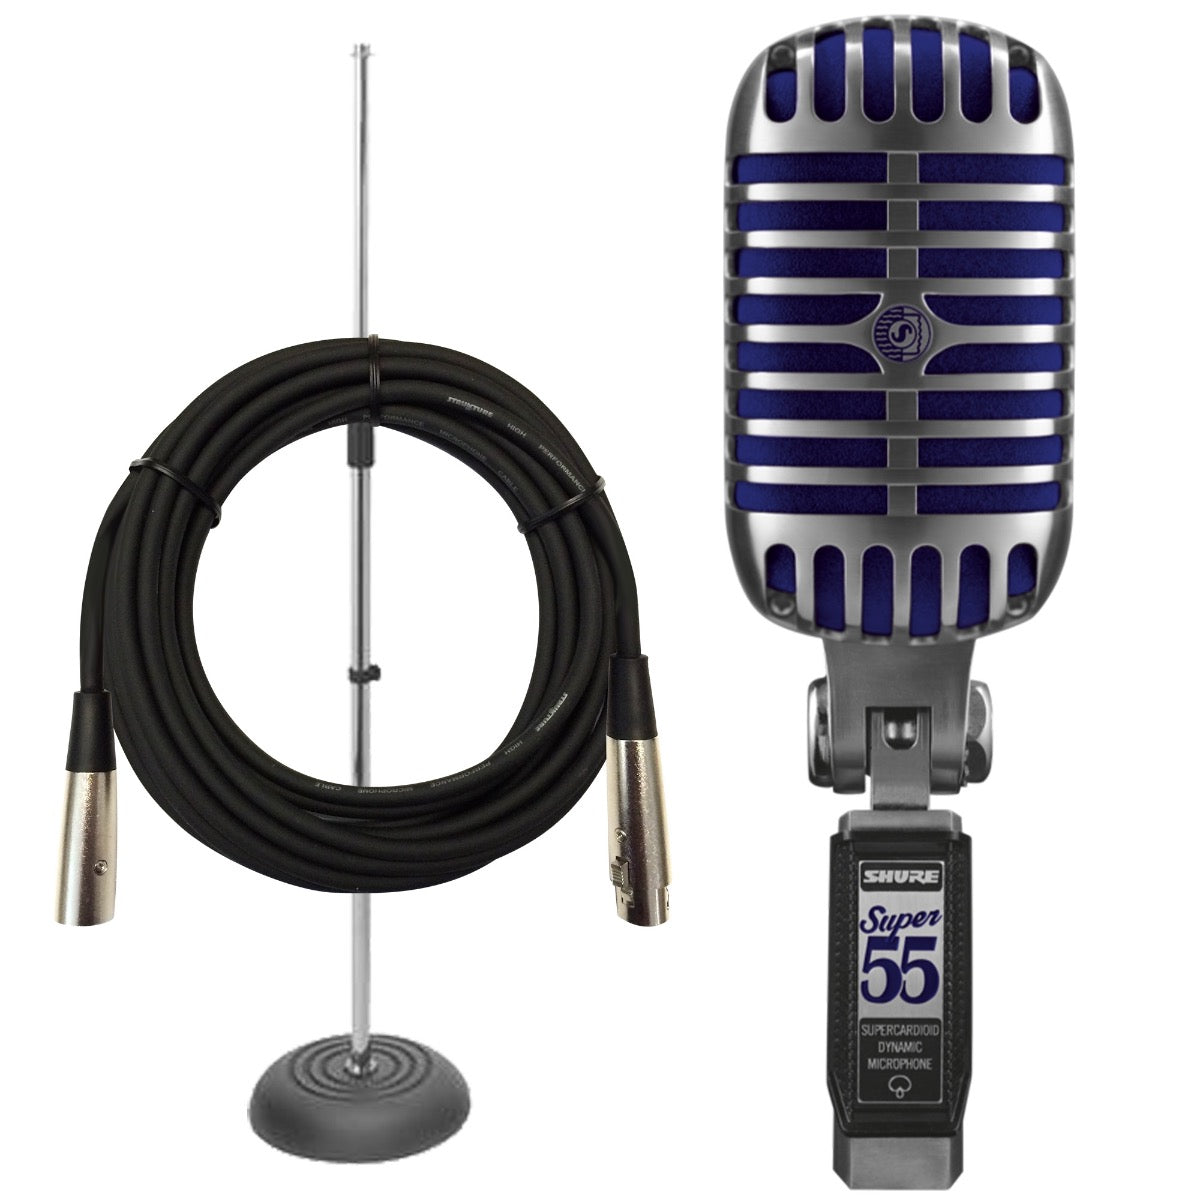 Shure Super 55 Deluxe Vocal Microphone PERFORMER PAK